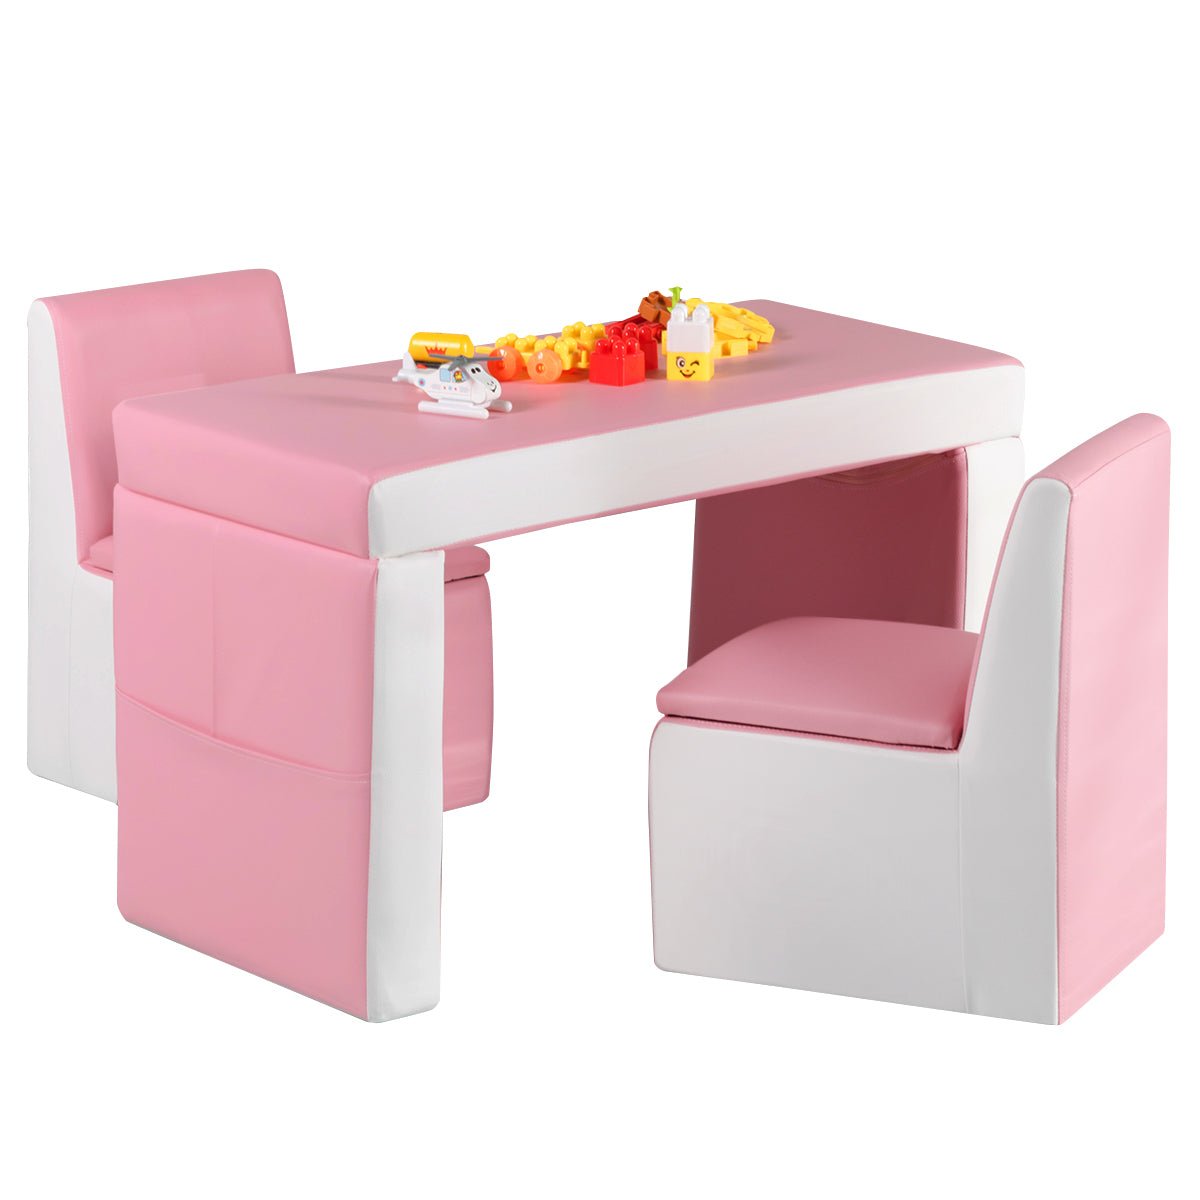 Pink Kids Sofa with Wooden Frame and Storage - Comfort with Convenience